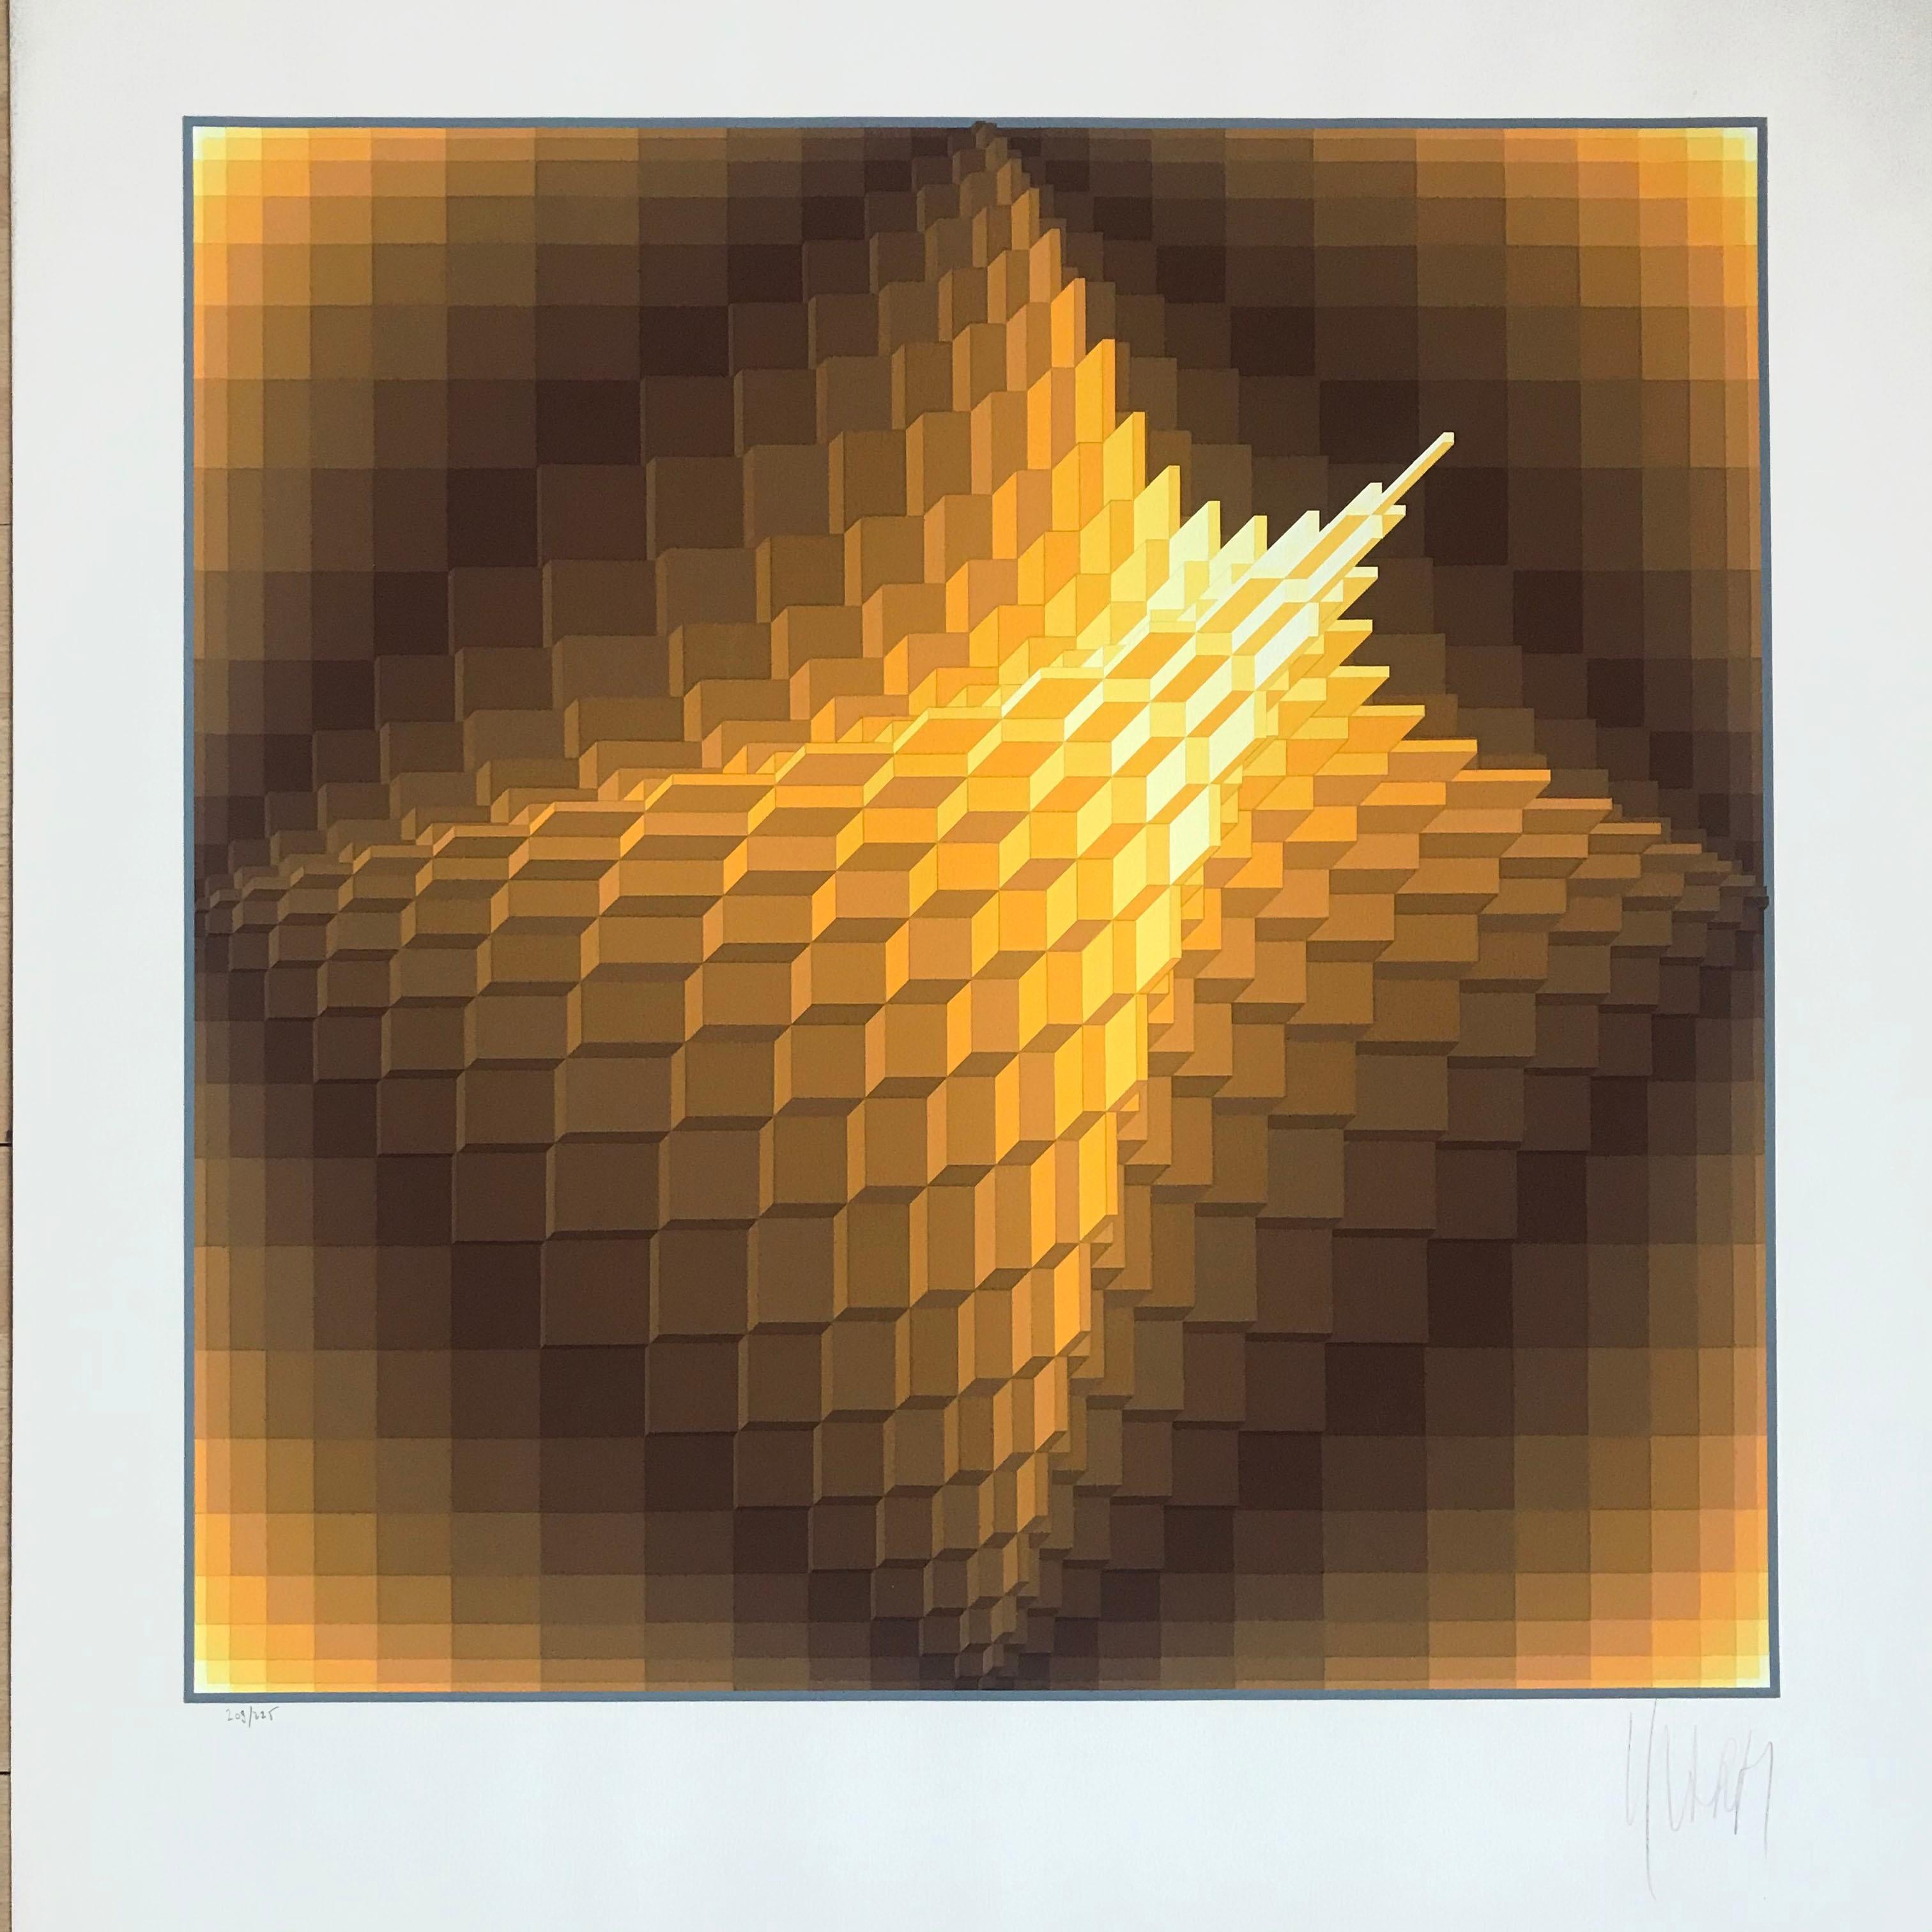 Yvaral Lithograph "Structure géométrique 1" 1974. - Art by Yvaral (Jean-Pierre Vasarely)